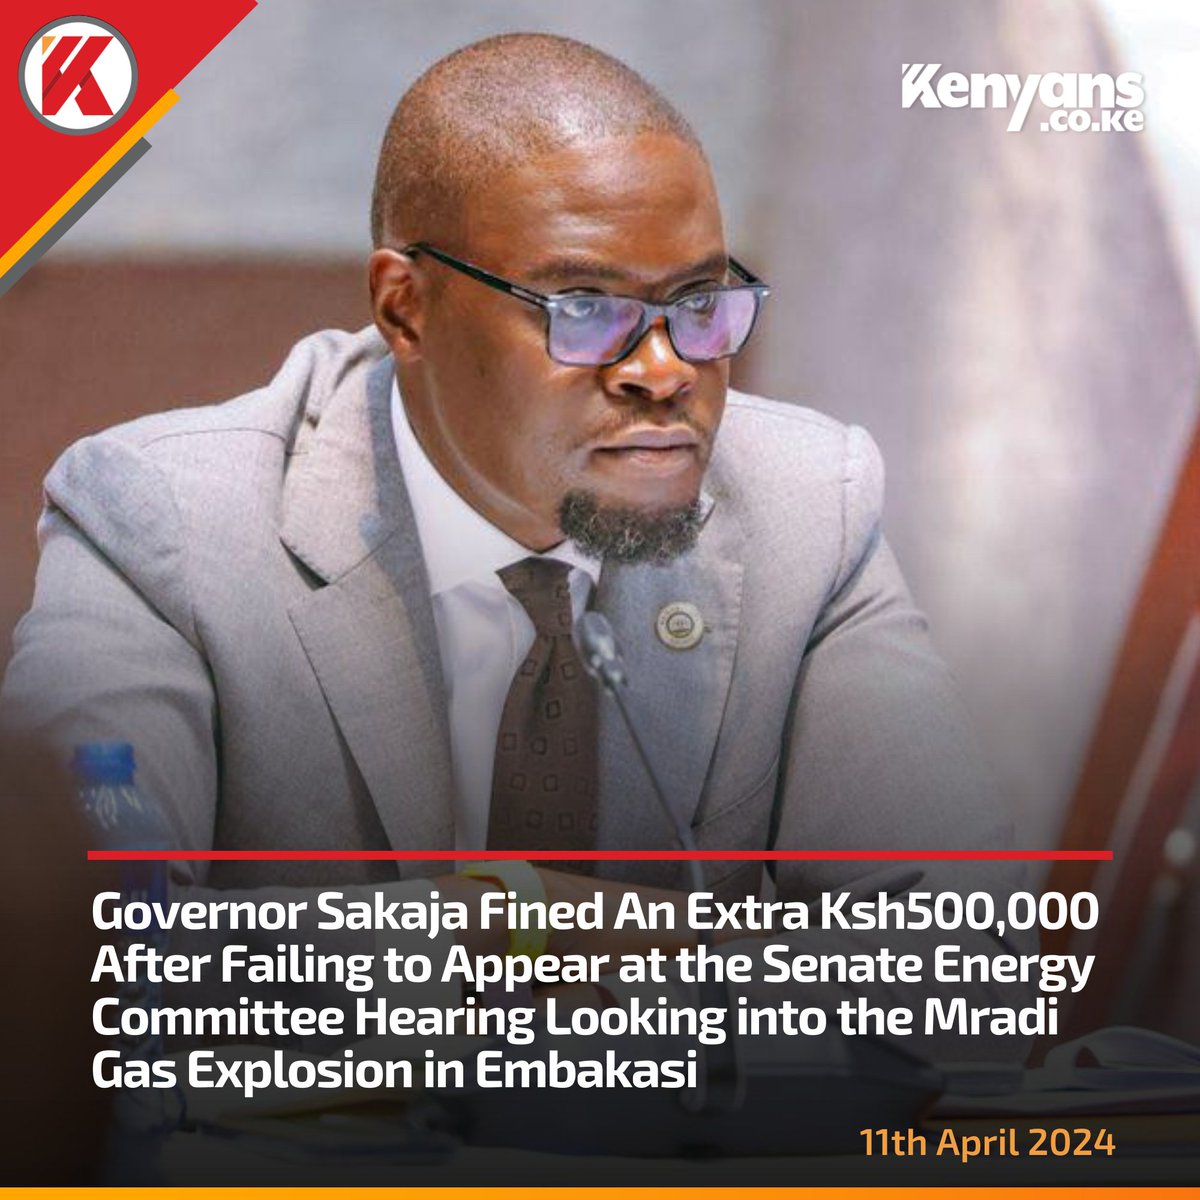 Governor Sakaja fined an extra Ksh500,000 after failing to appear at the Senate Energy Committee Hearing looking into the Mradi gas explosion